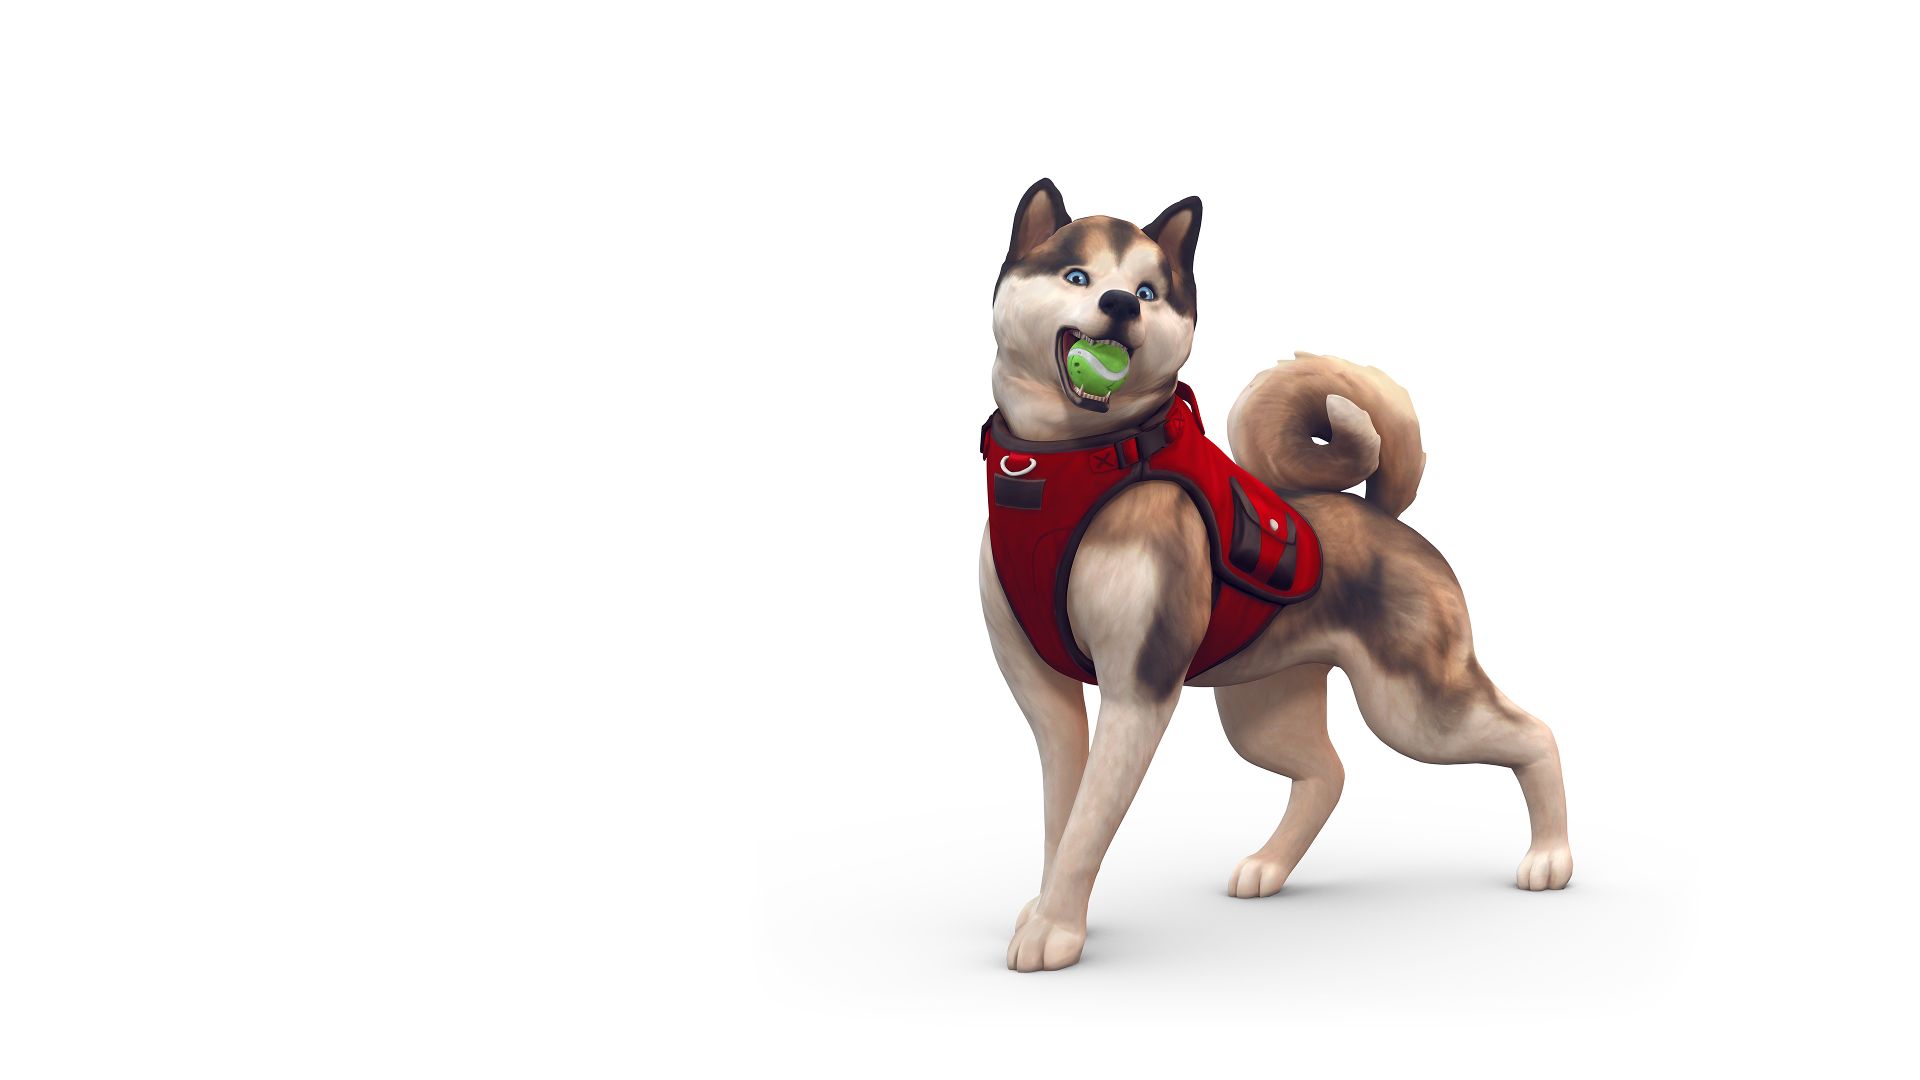 The sims 4 cats dogs mac download free game for mac